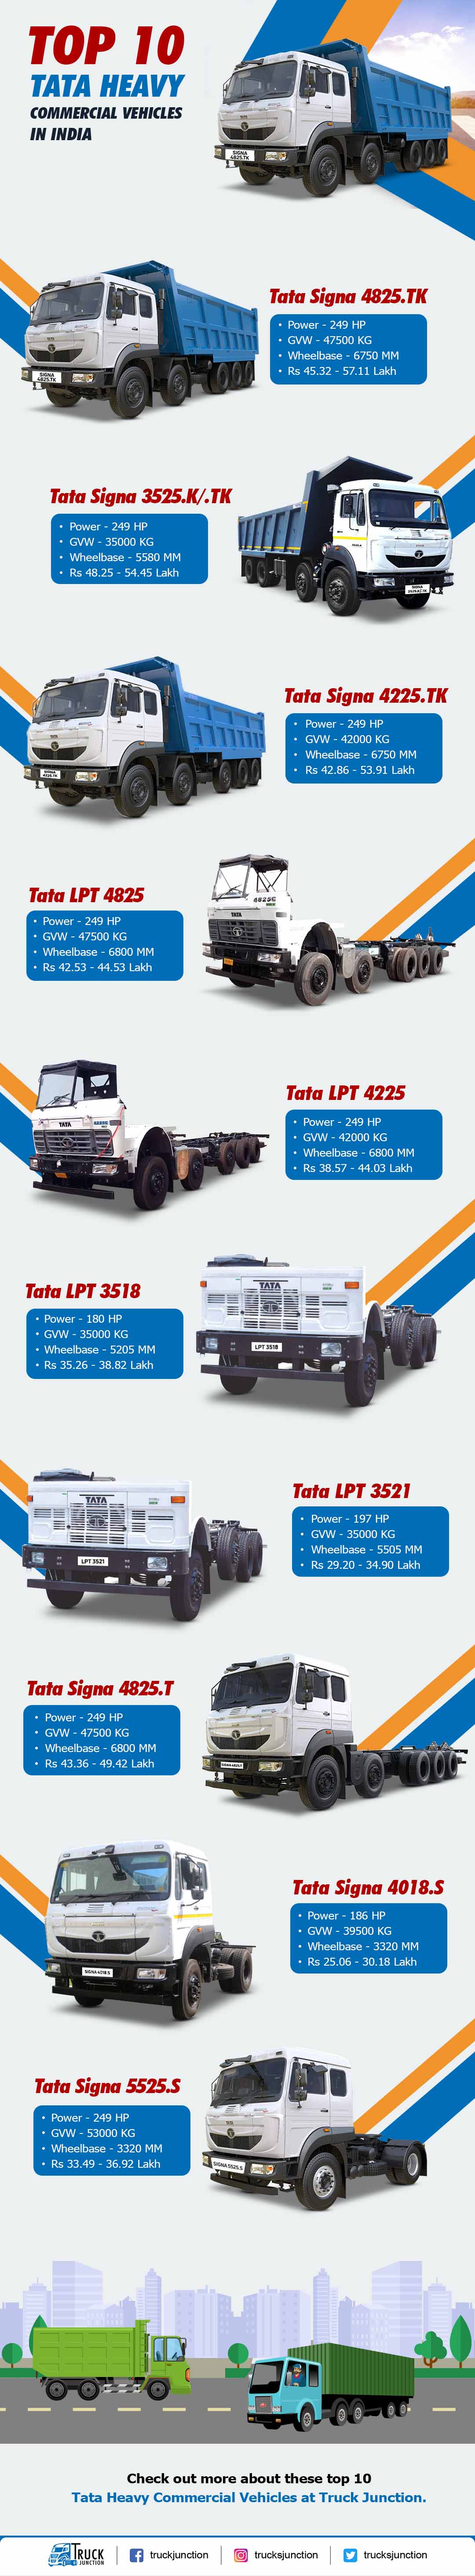 Top 10 Tata Heavy Commercial Vehicles - infographic